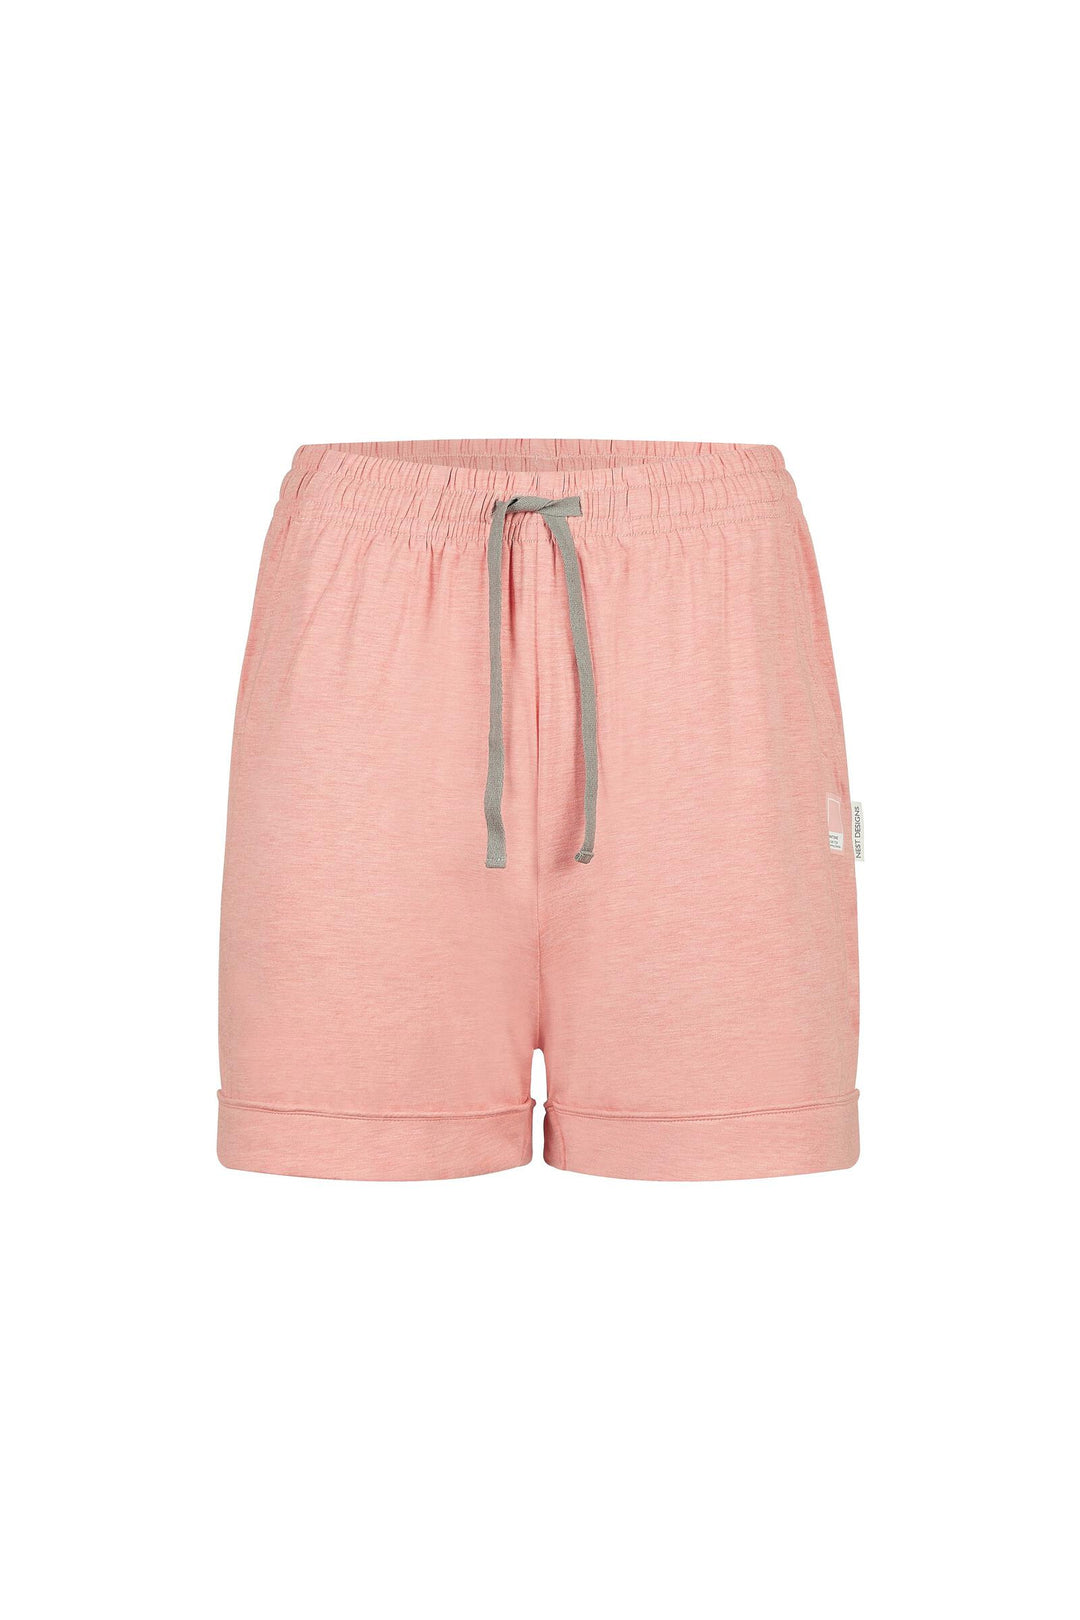 Women's Bamboo Jersey Shorts in Coral Almond